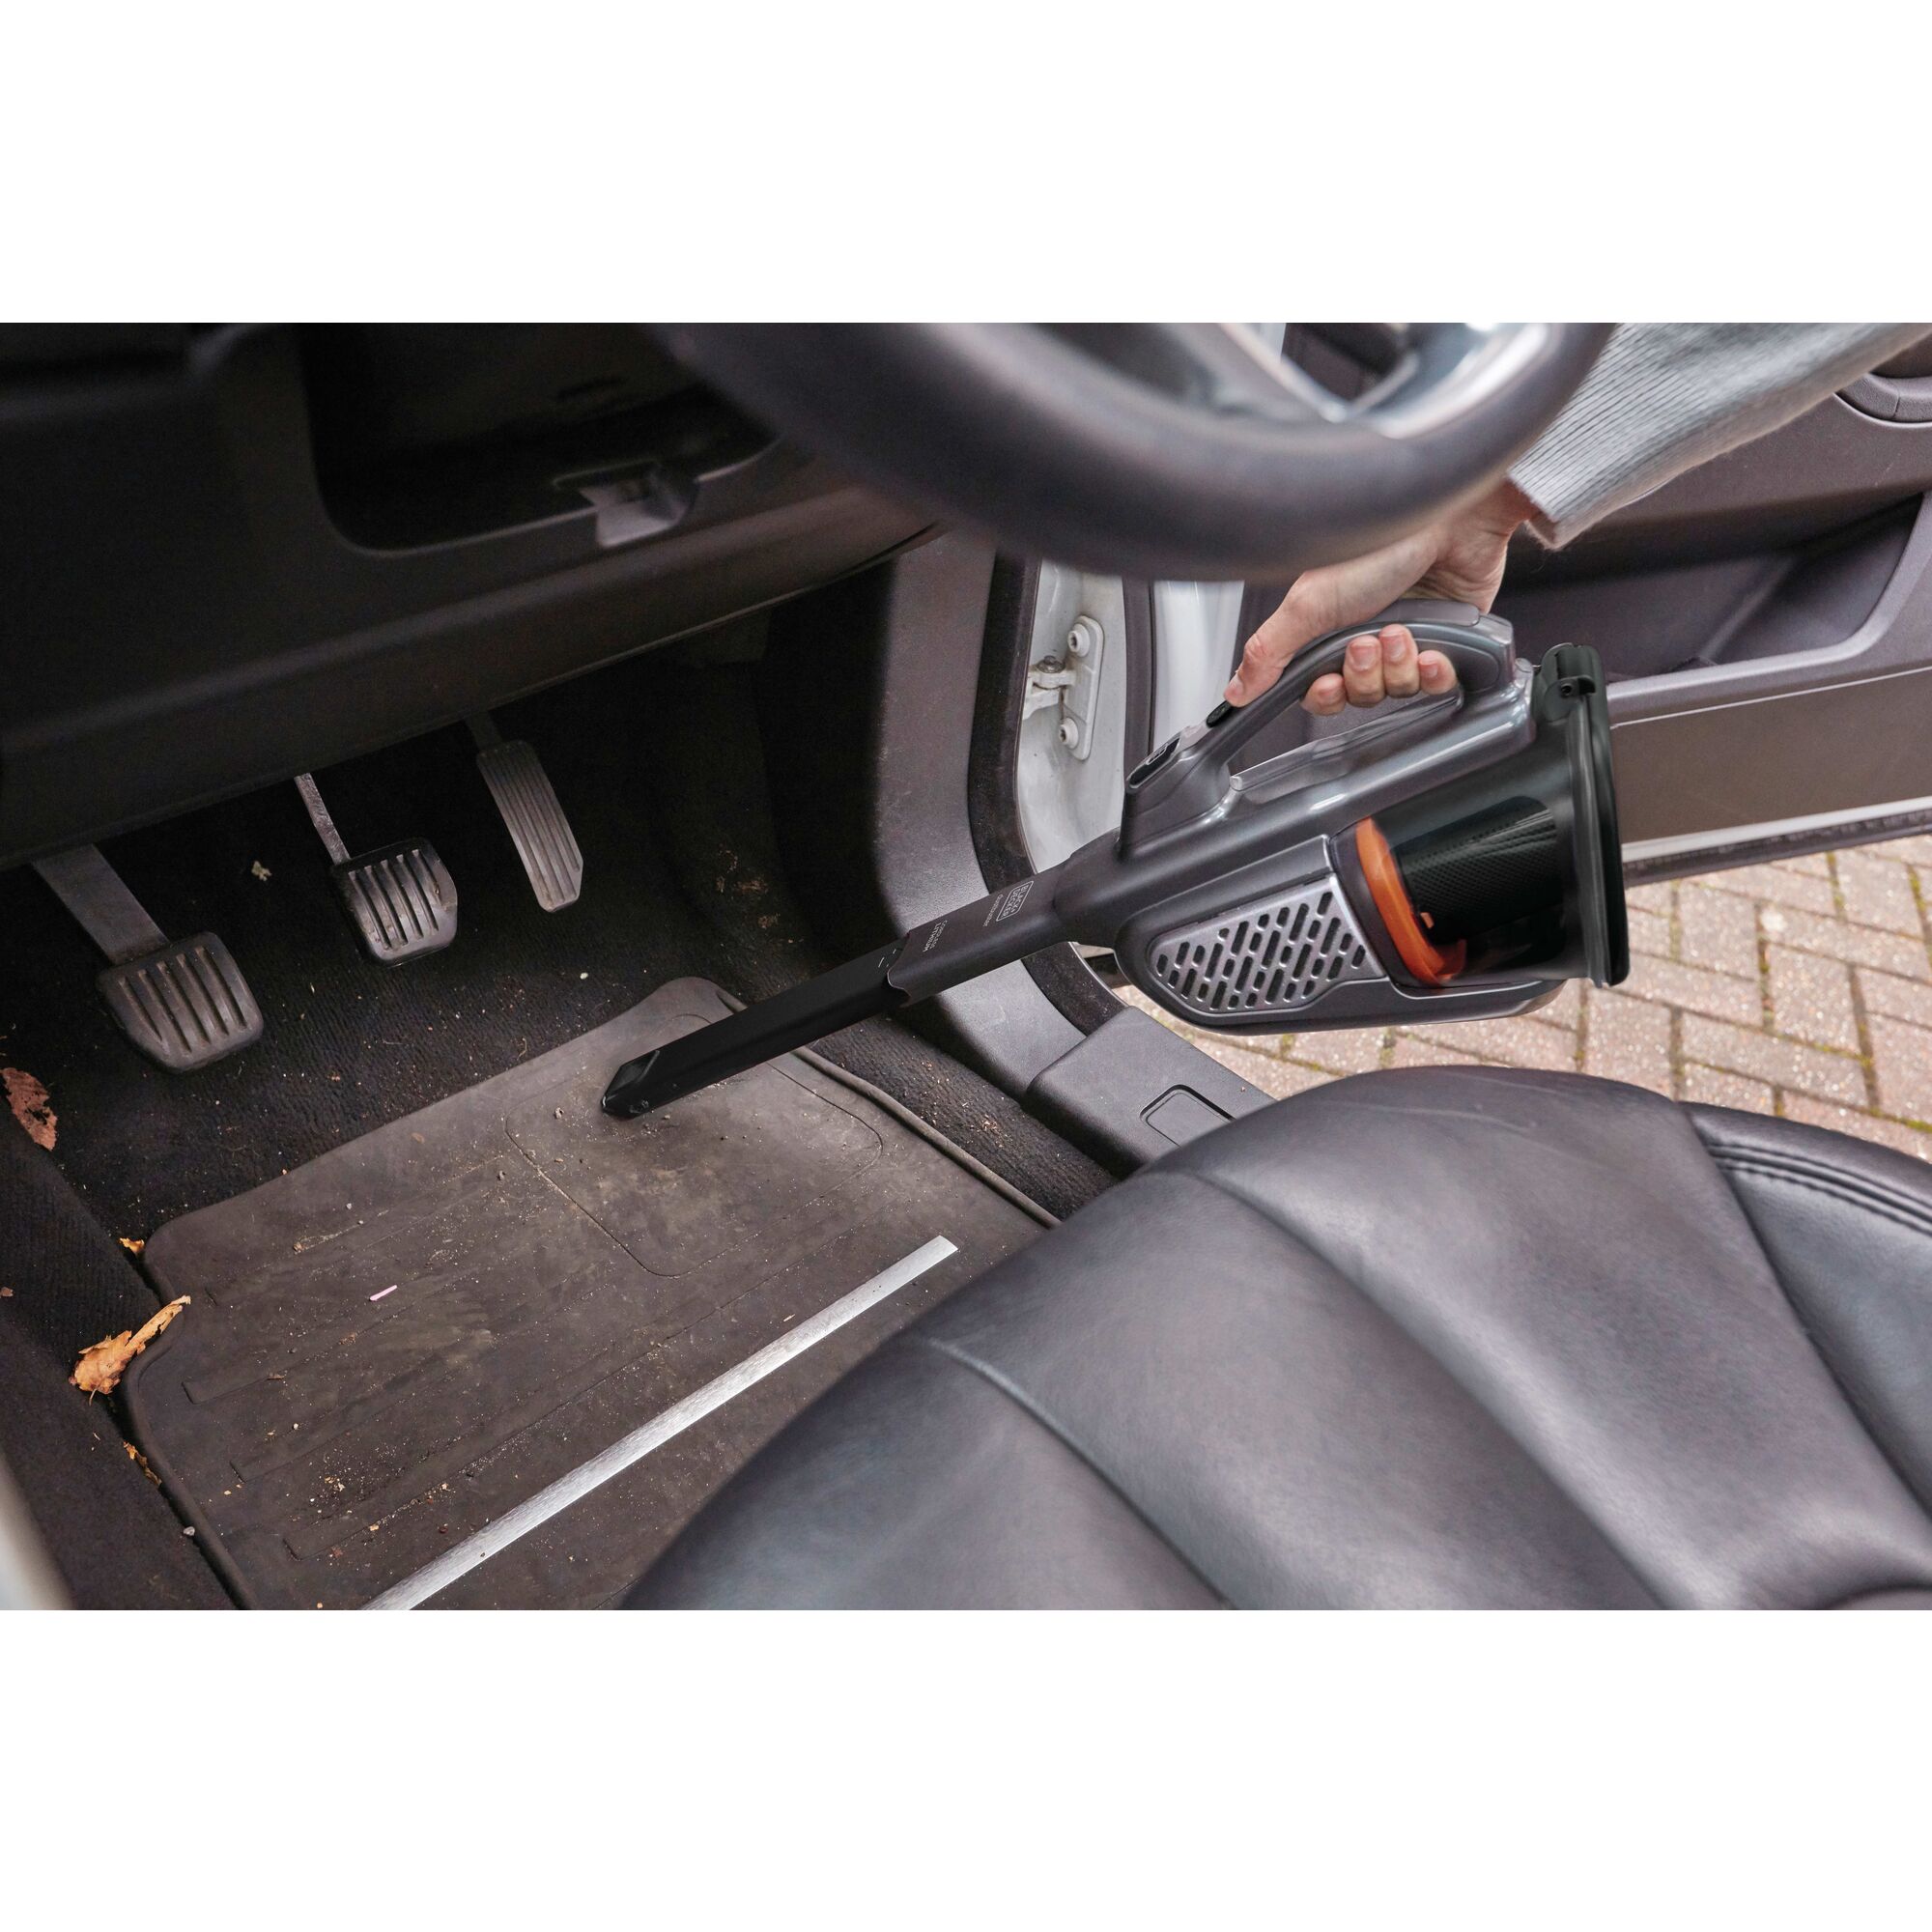 16 volt MAX dustbuster Advanced Clean Hand Vacuum being used to clean car mat.